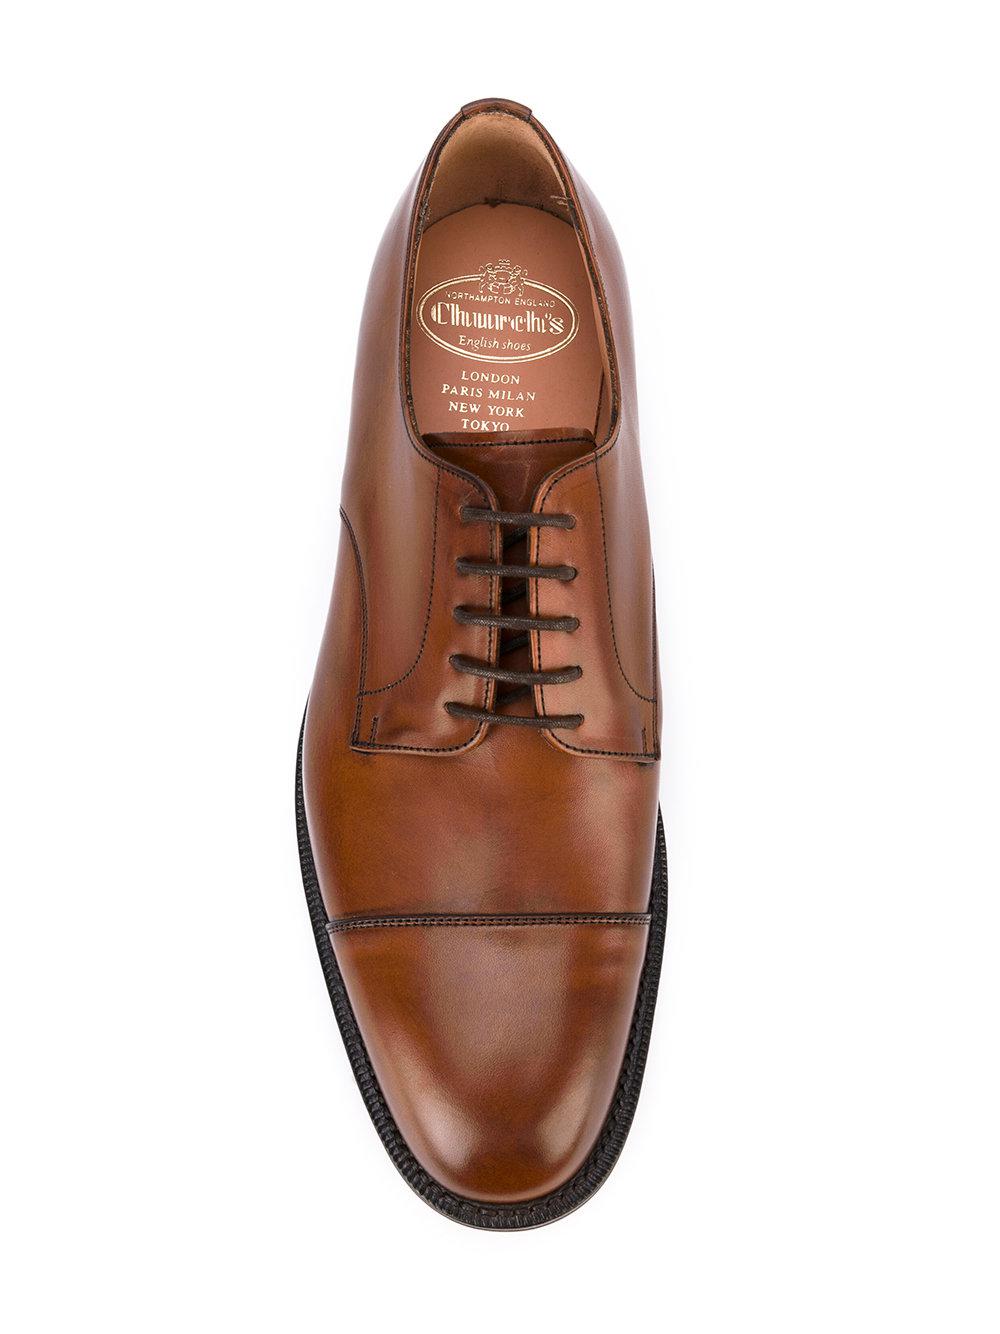 Church's Leather Classic Oxford Shoes in Brown for Men - Lyst